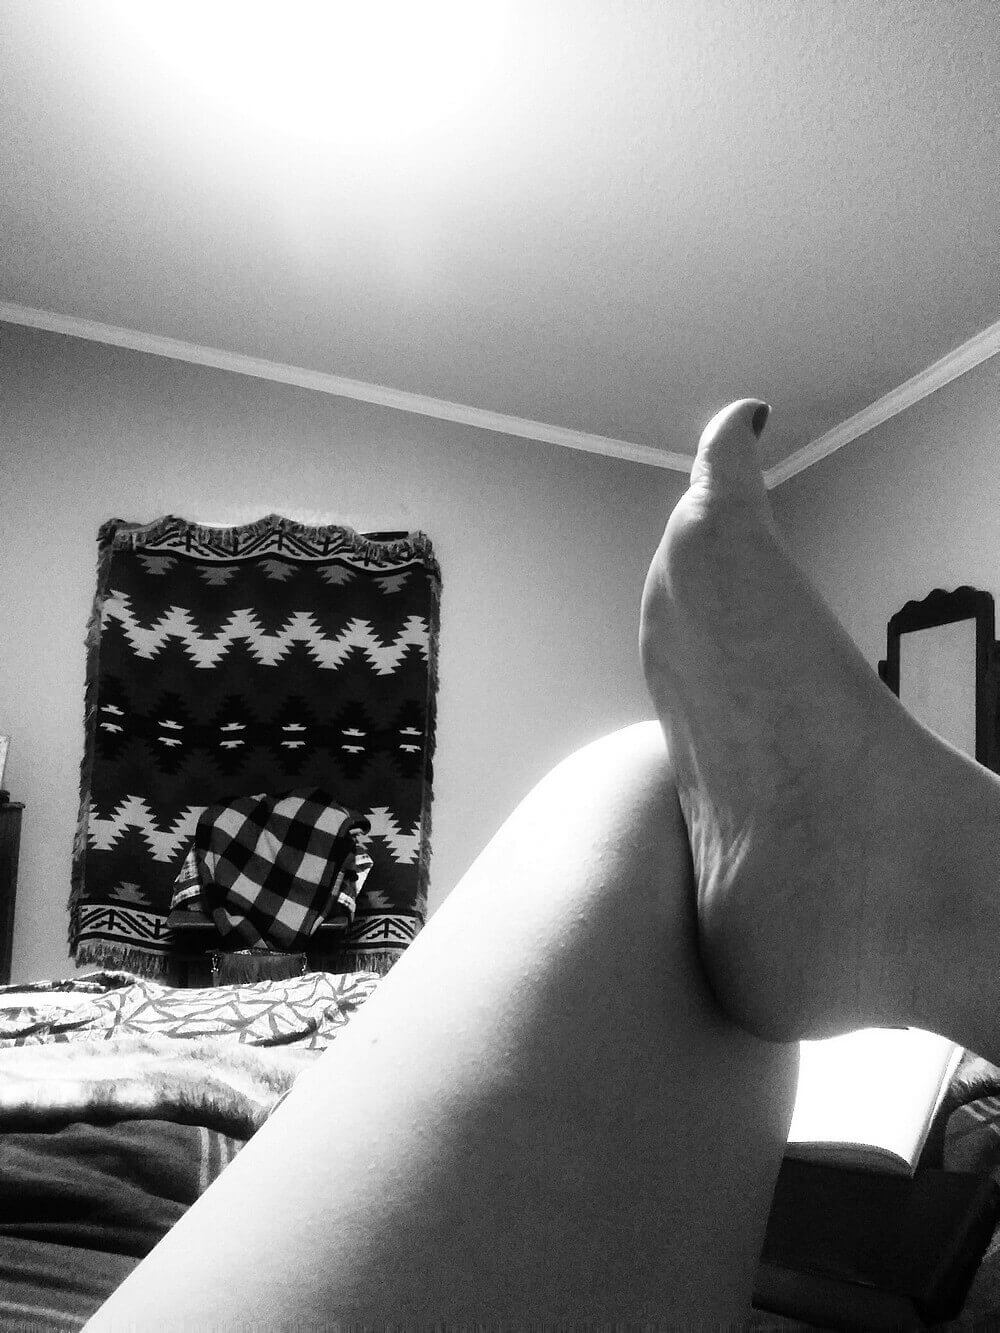 Bare leg and foot on bed, warm glow created by ceiling light; textured pattern curtain in background; black and white